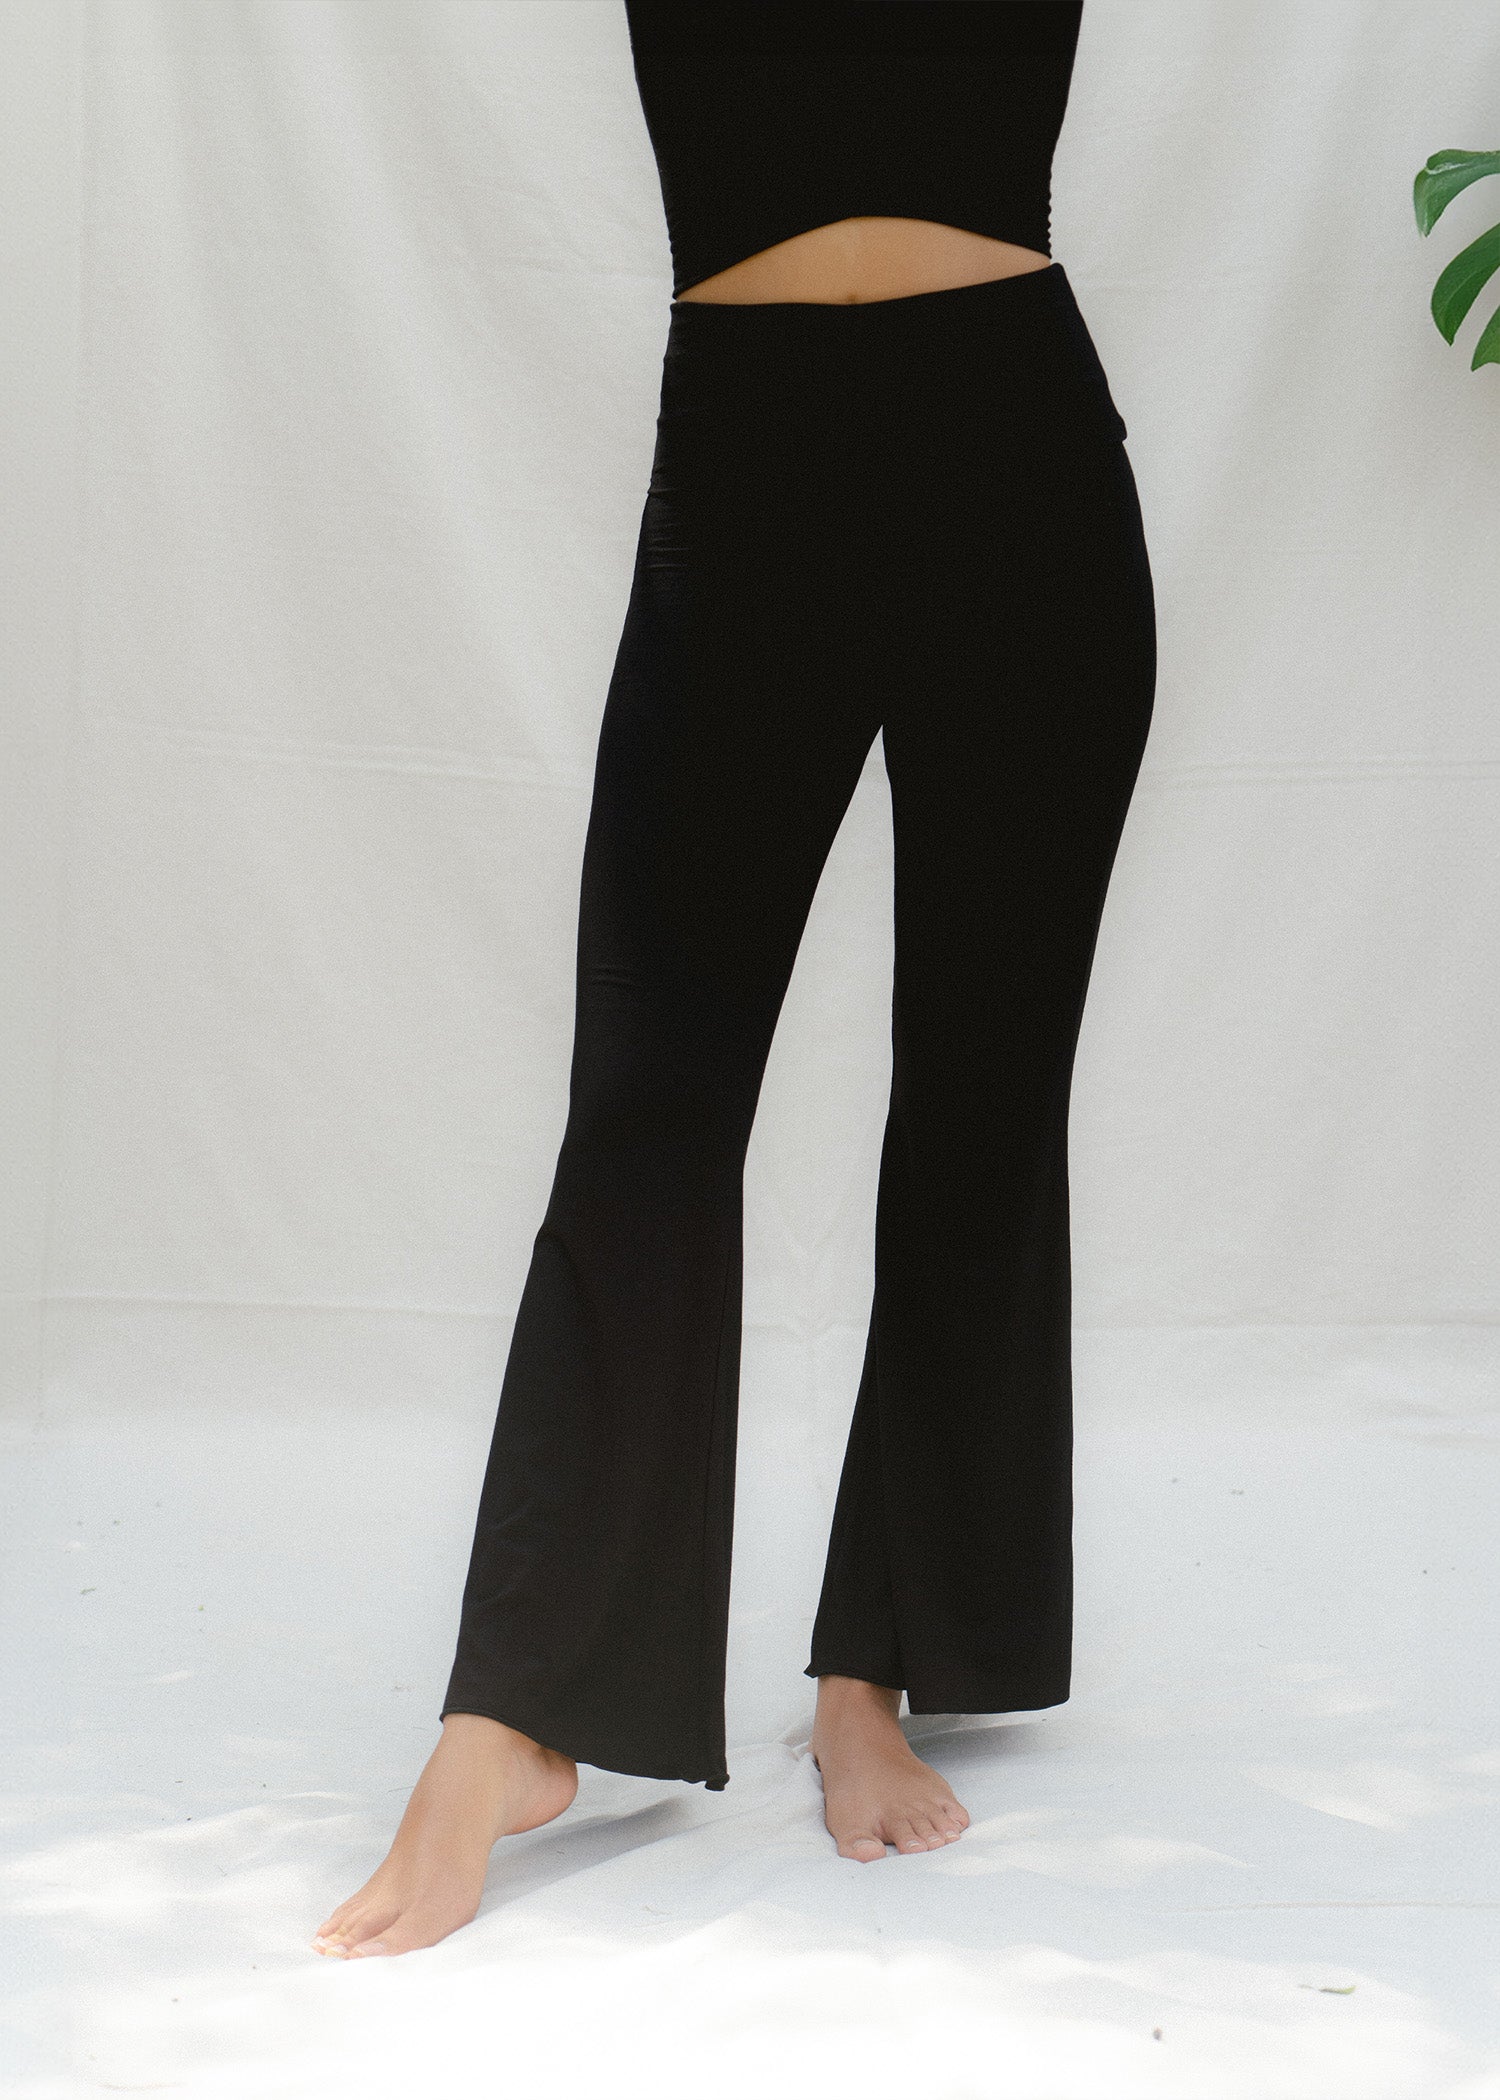 Buy Black Cotton Flared Yoga Pants 5 COLOURS Comfy Leggings Yoga Trousers Bell  Bottoms Flares Hippy Boho Festival Clothing Women Calluna Online in India 